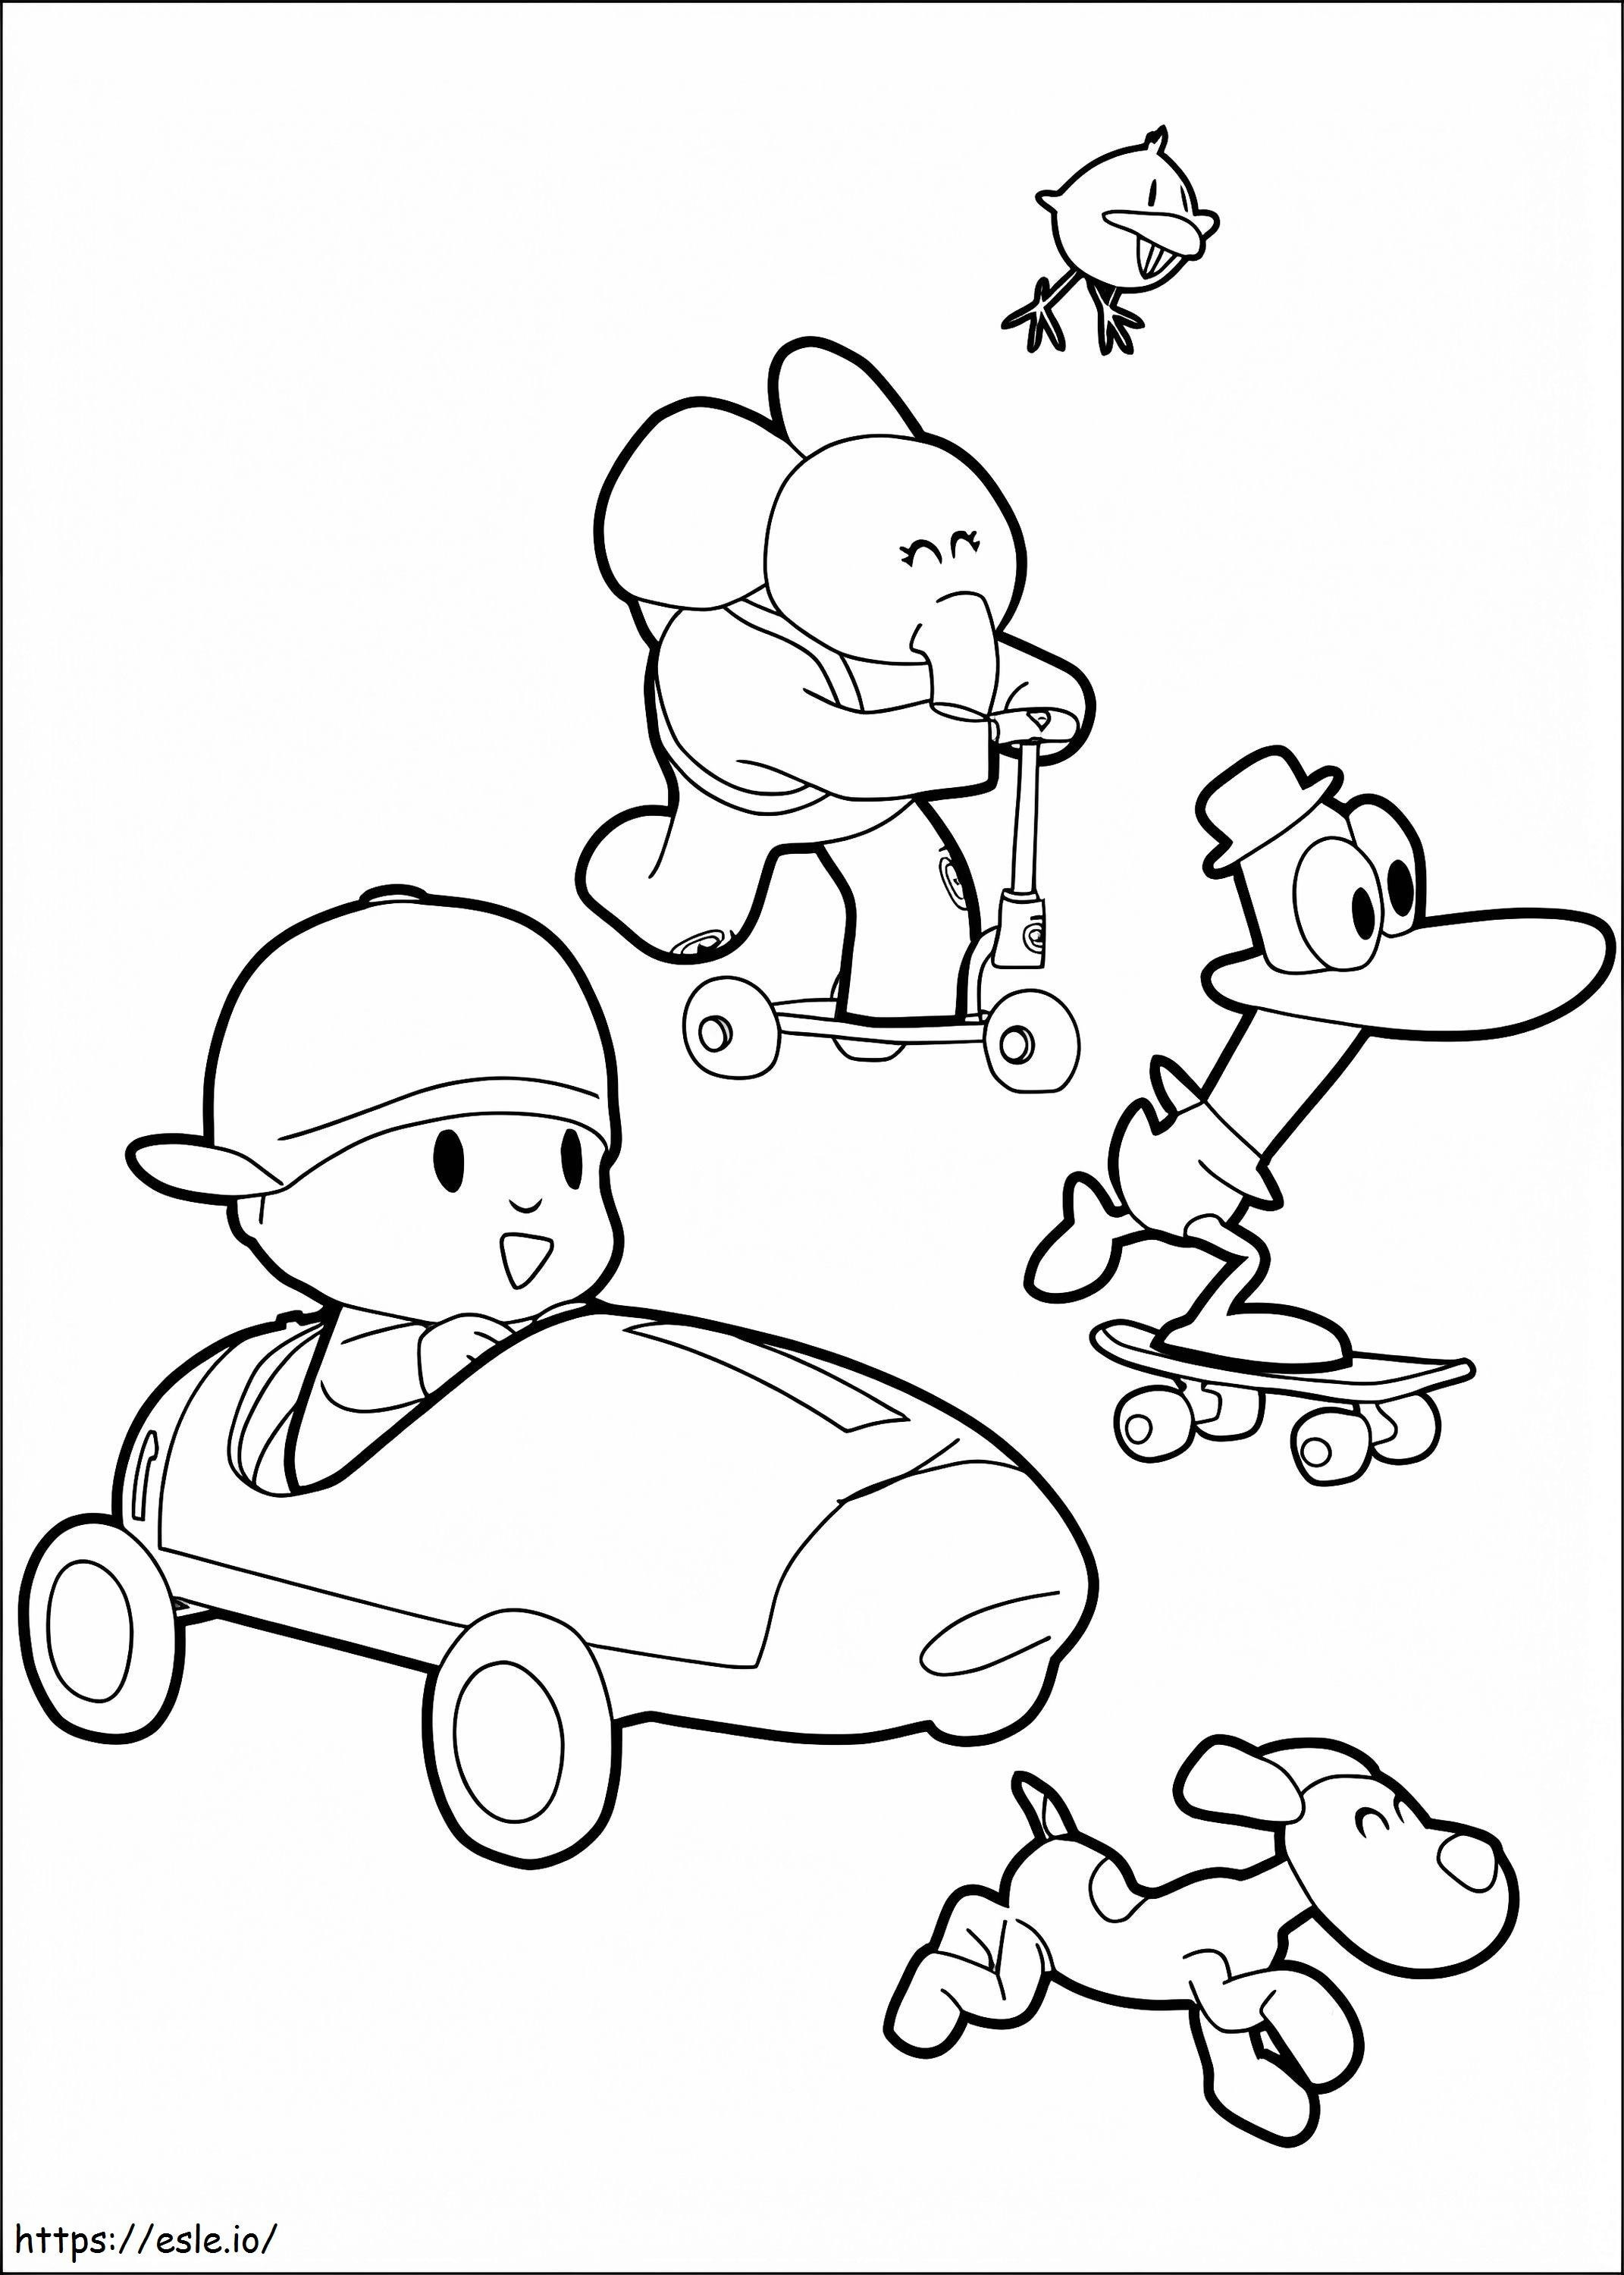 Pocoyo And Friends 2 coloring page